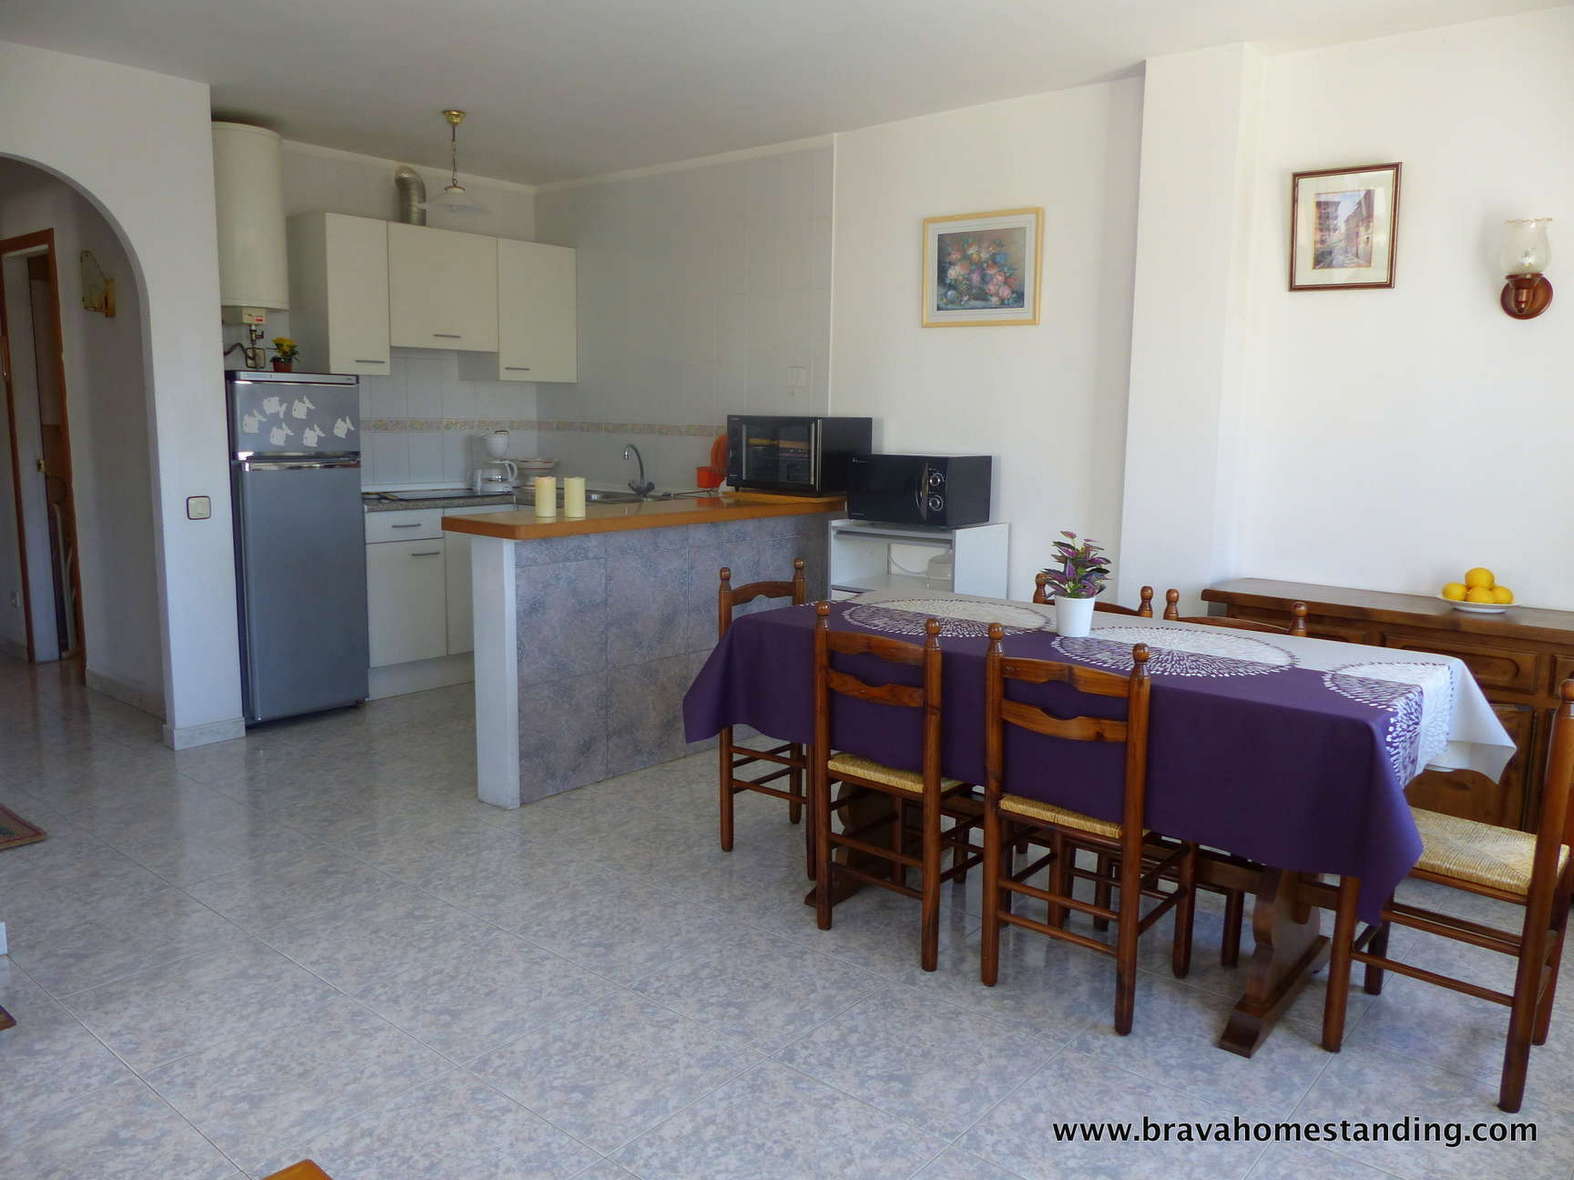 EMPURIABRAVA: Nice apartment with views on the canal